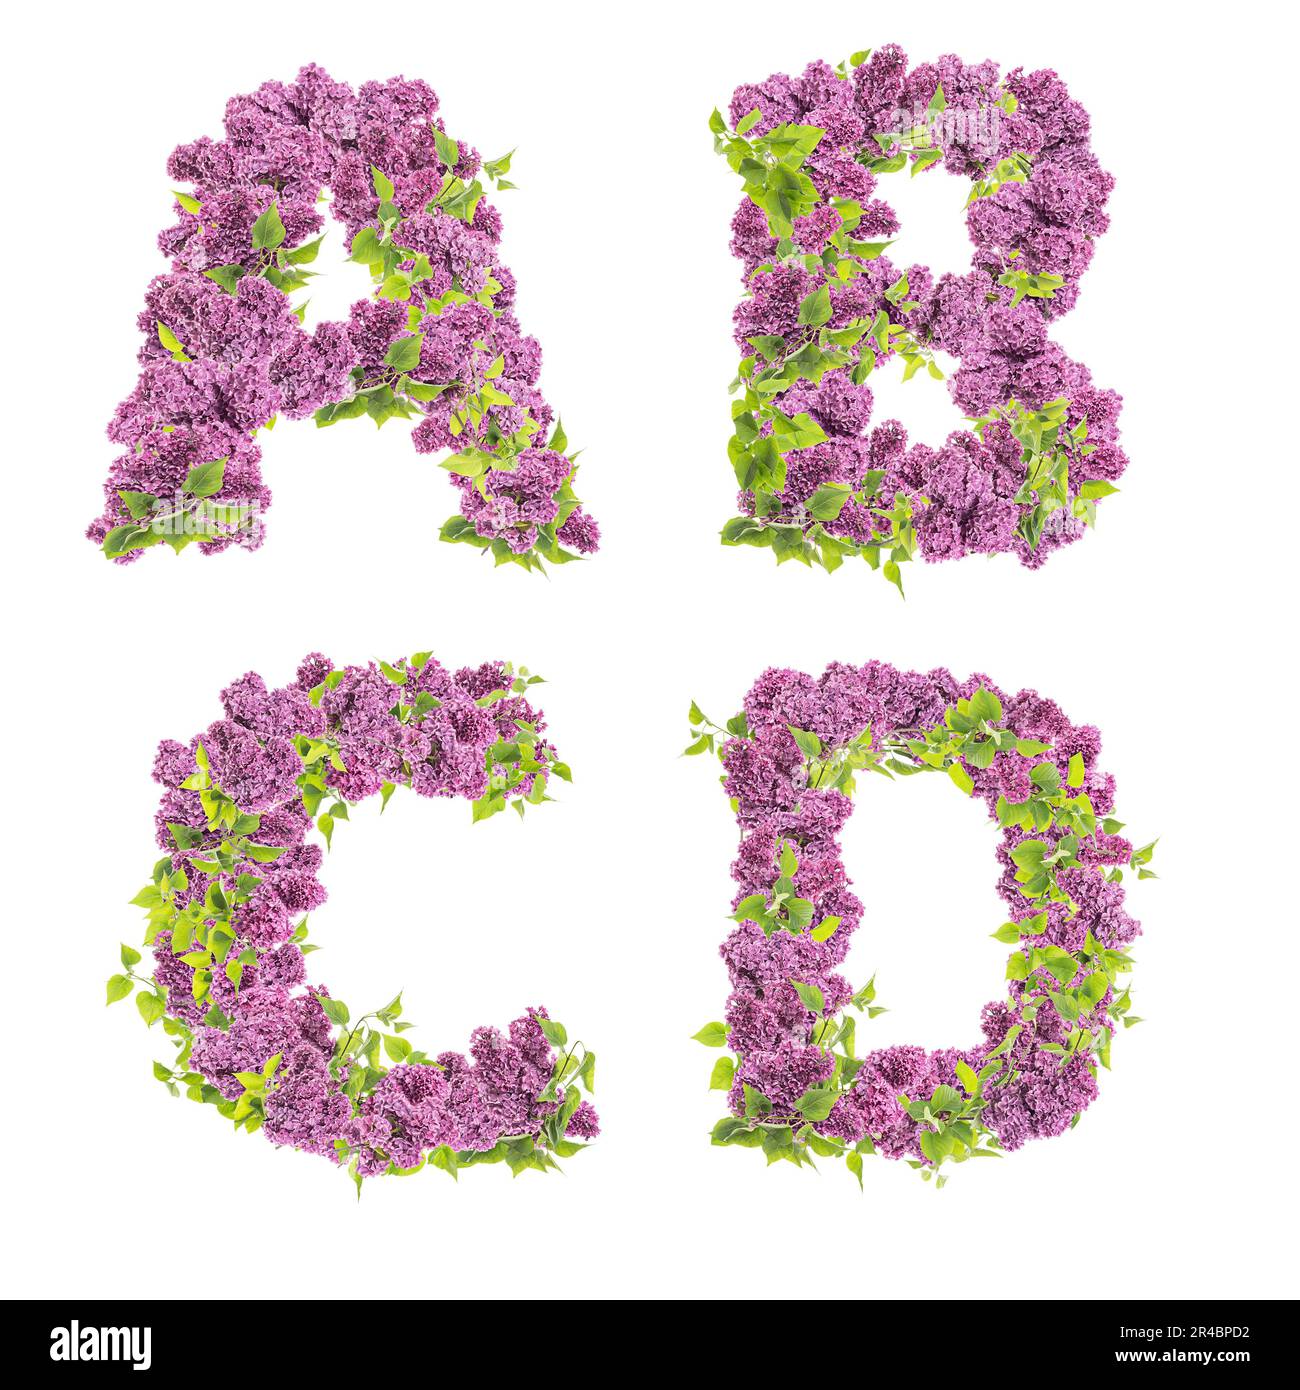 3D rendering of Lilac flowers capital letters alphabet - letters A-D Stock Photo